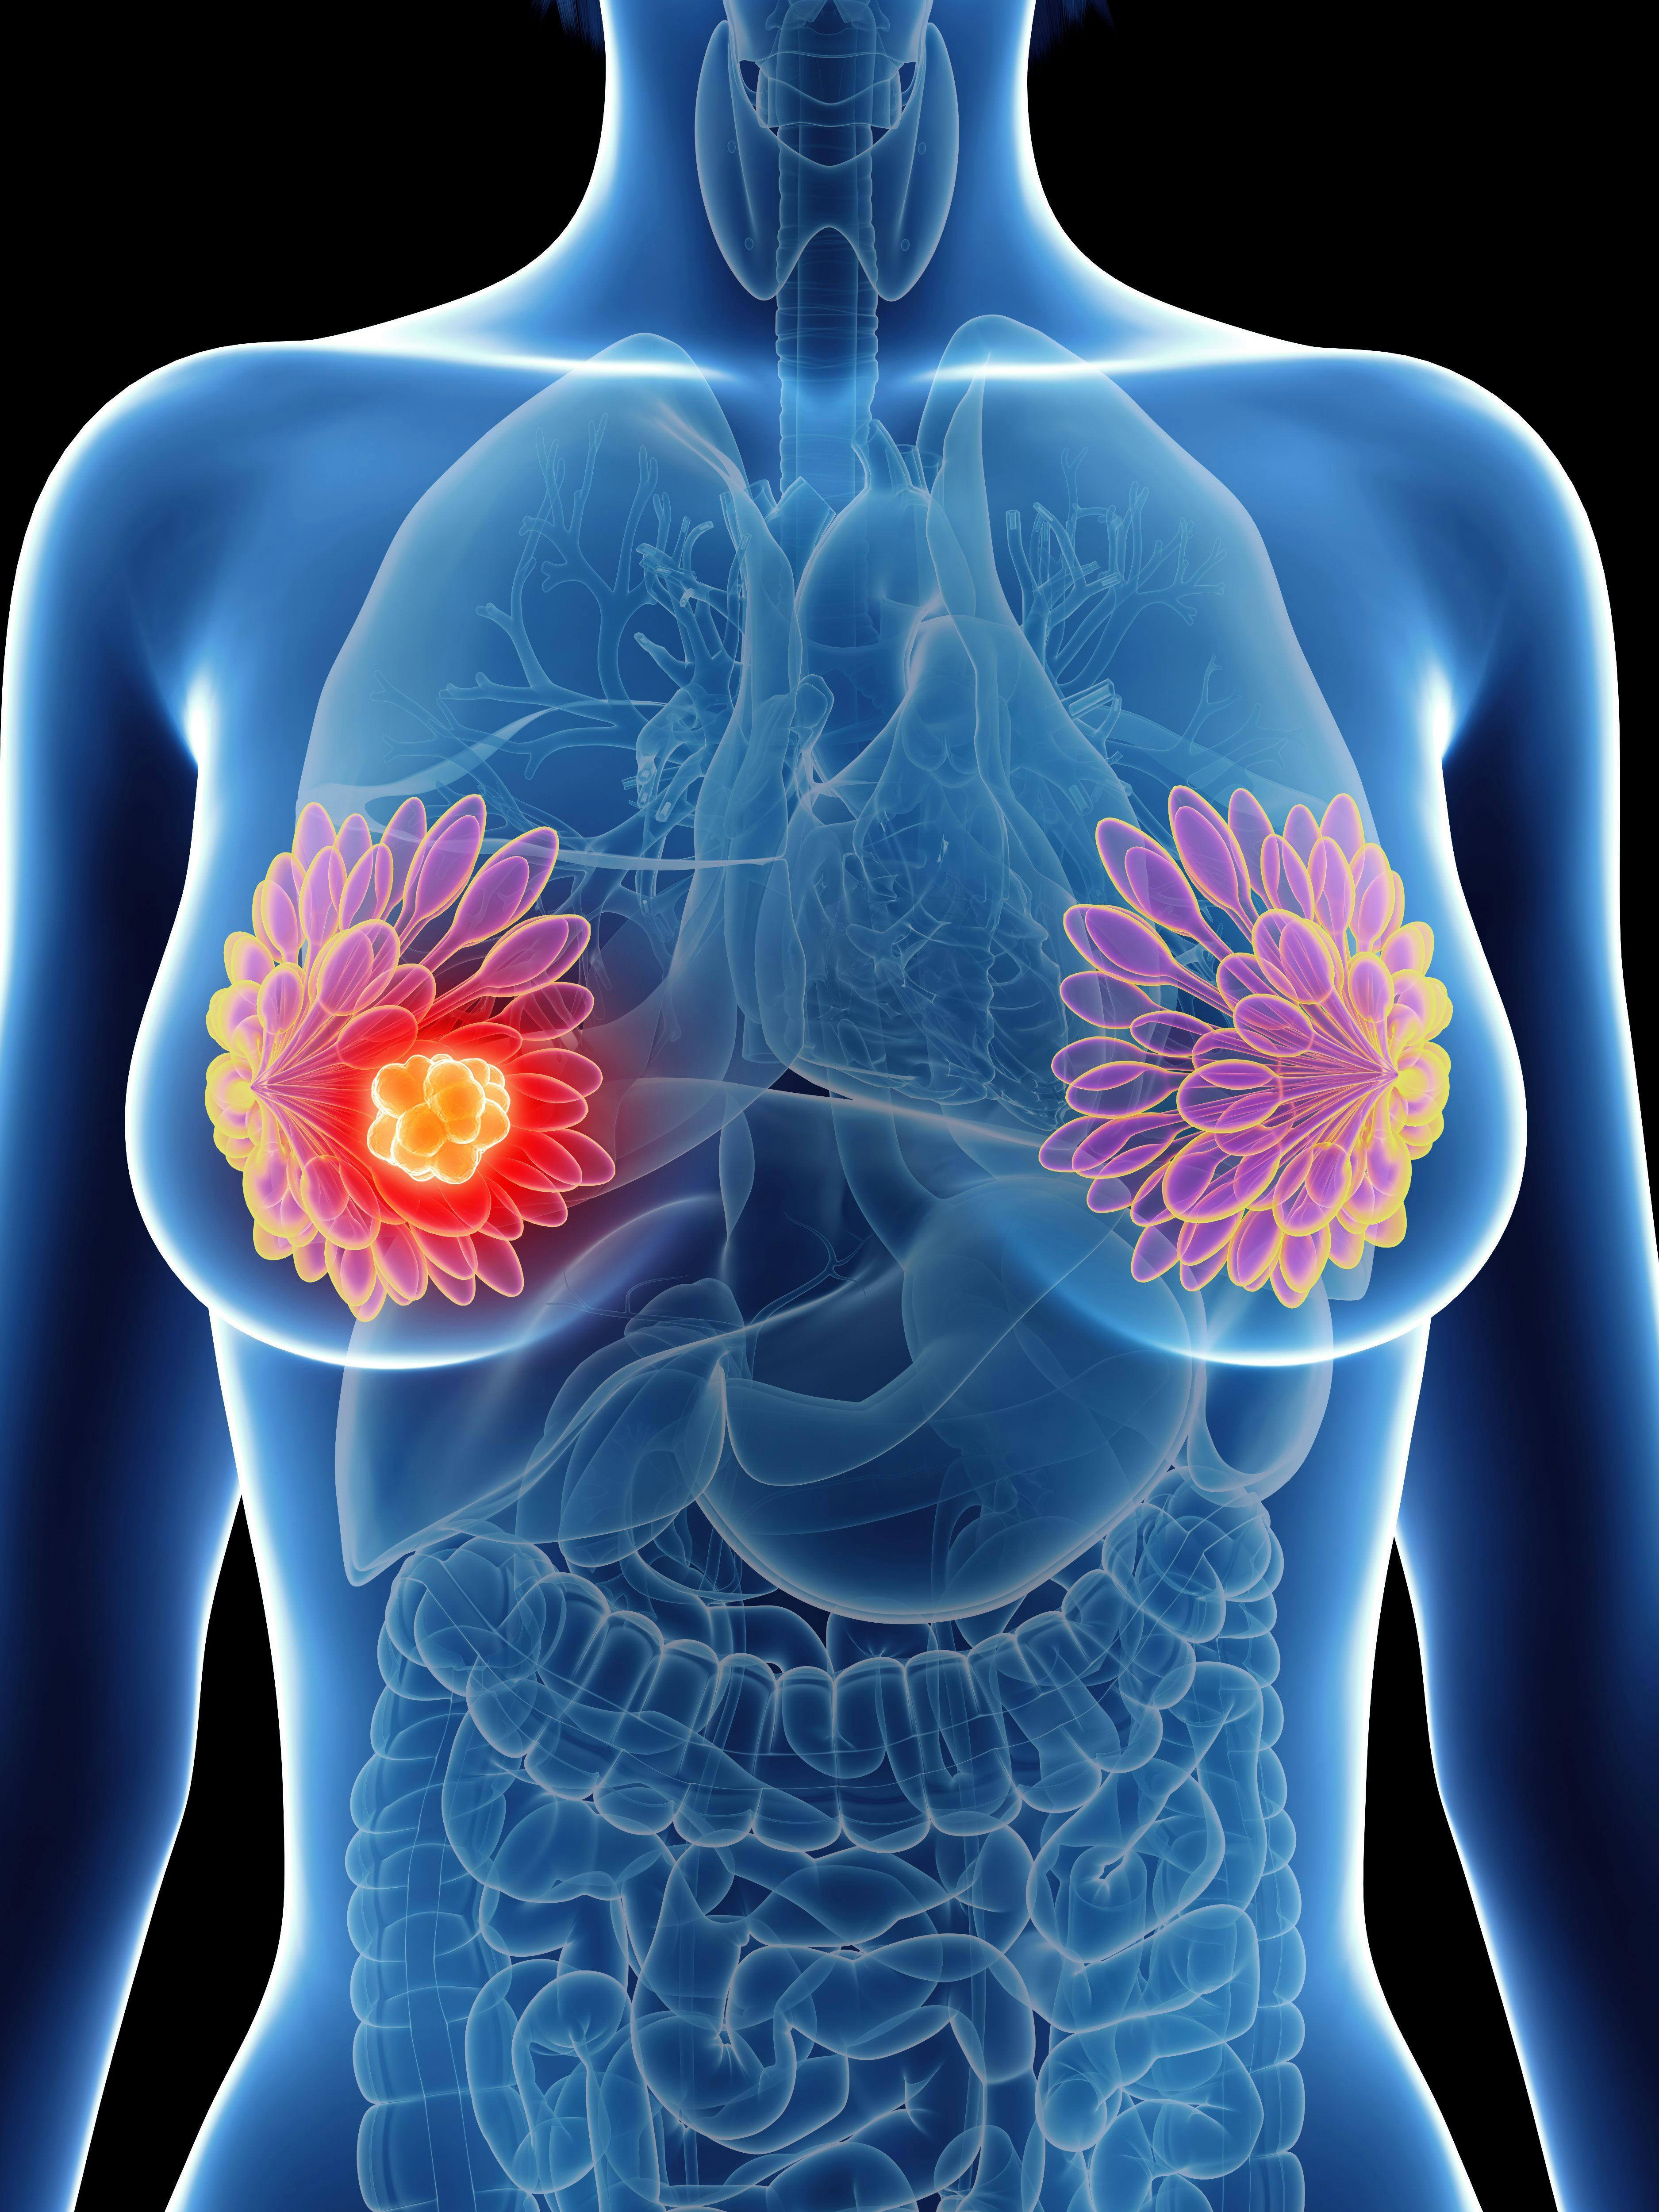 T-DXd Yields Consistent Results in HER2-Low Advanced Breast Cancer